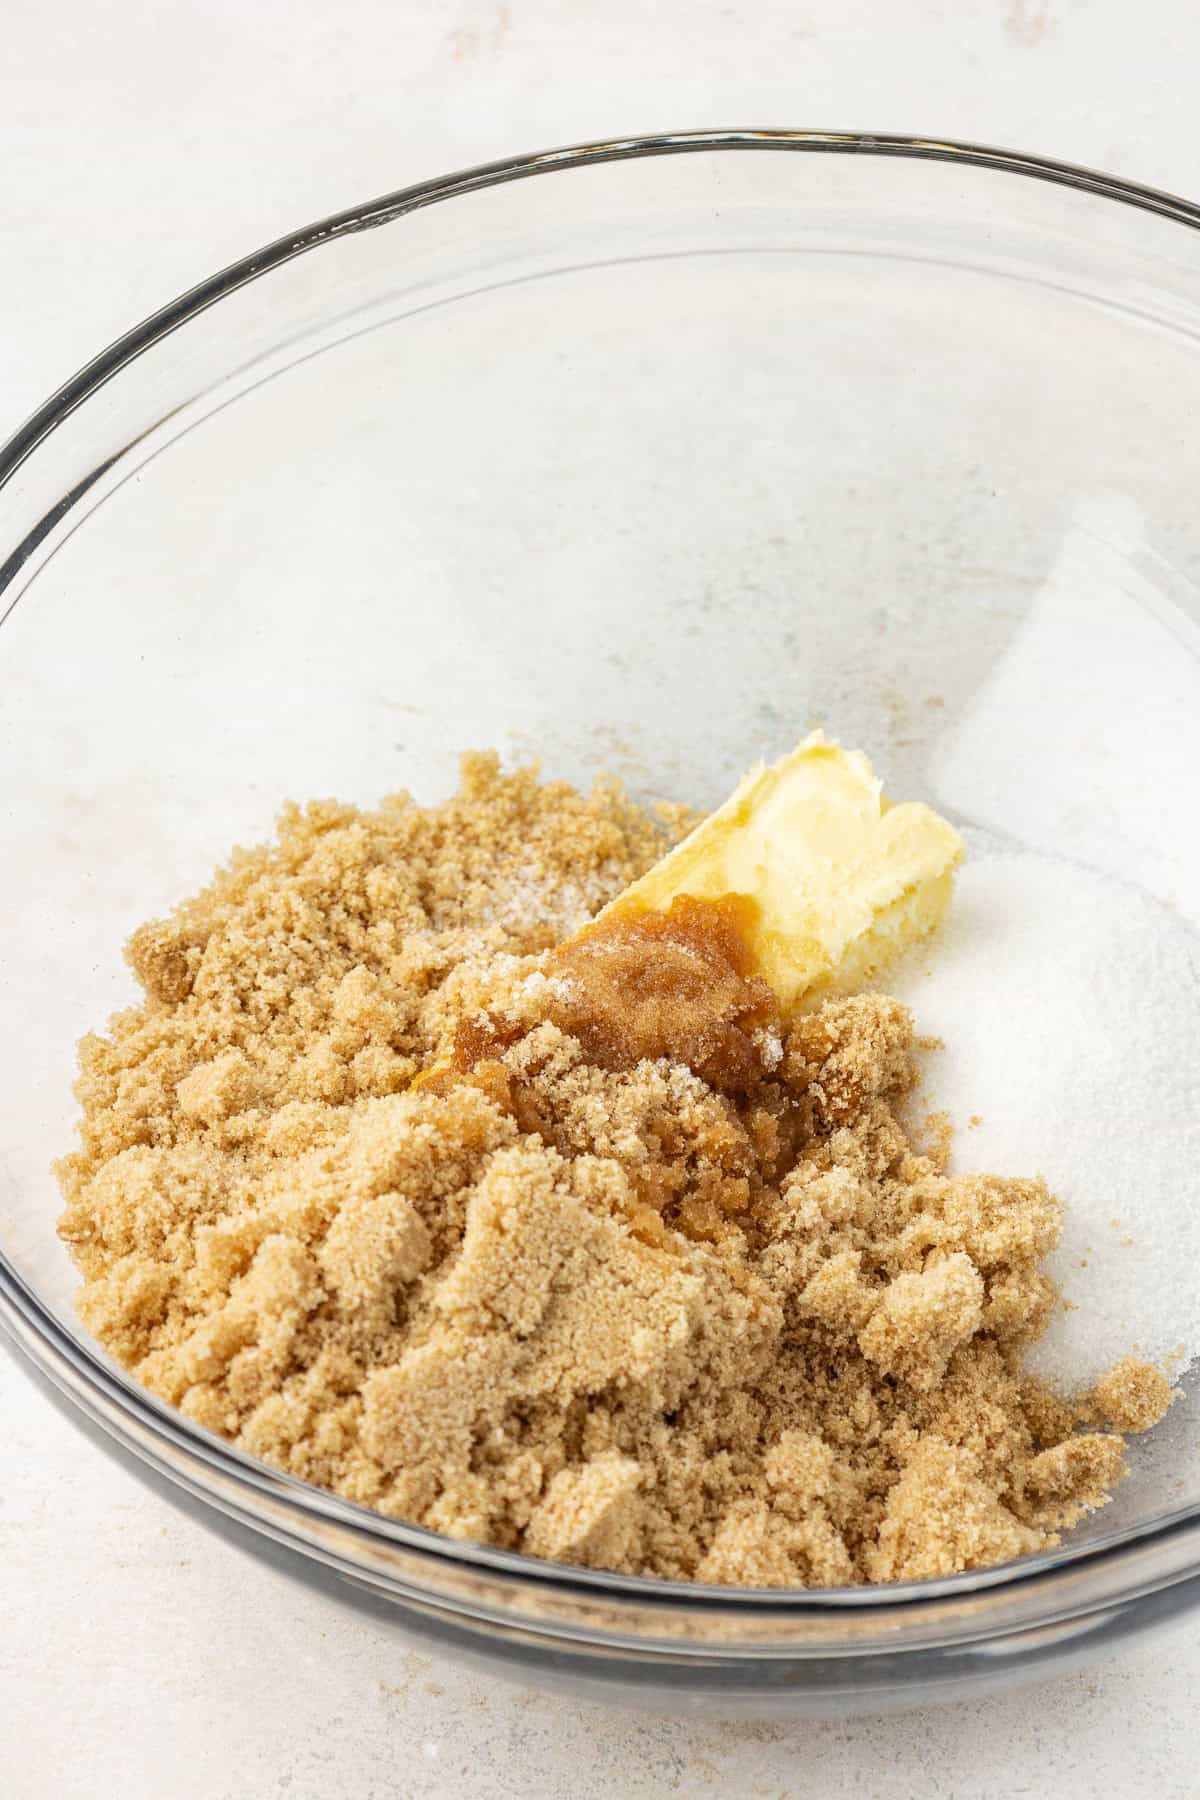 brown sugar, granulated sugar, butter, vanilla extract and salt in a clear glass bowl